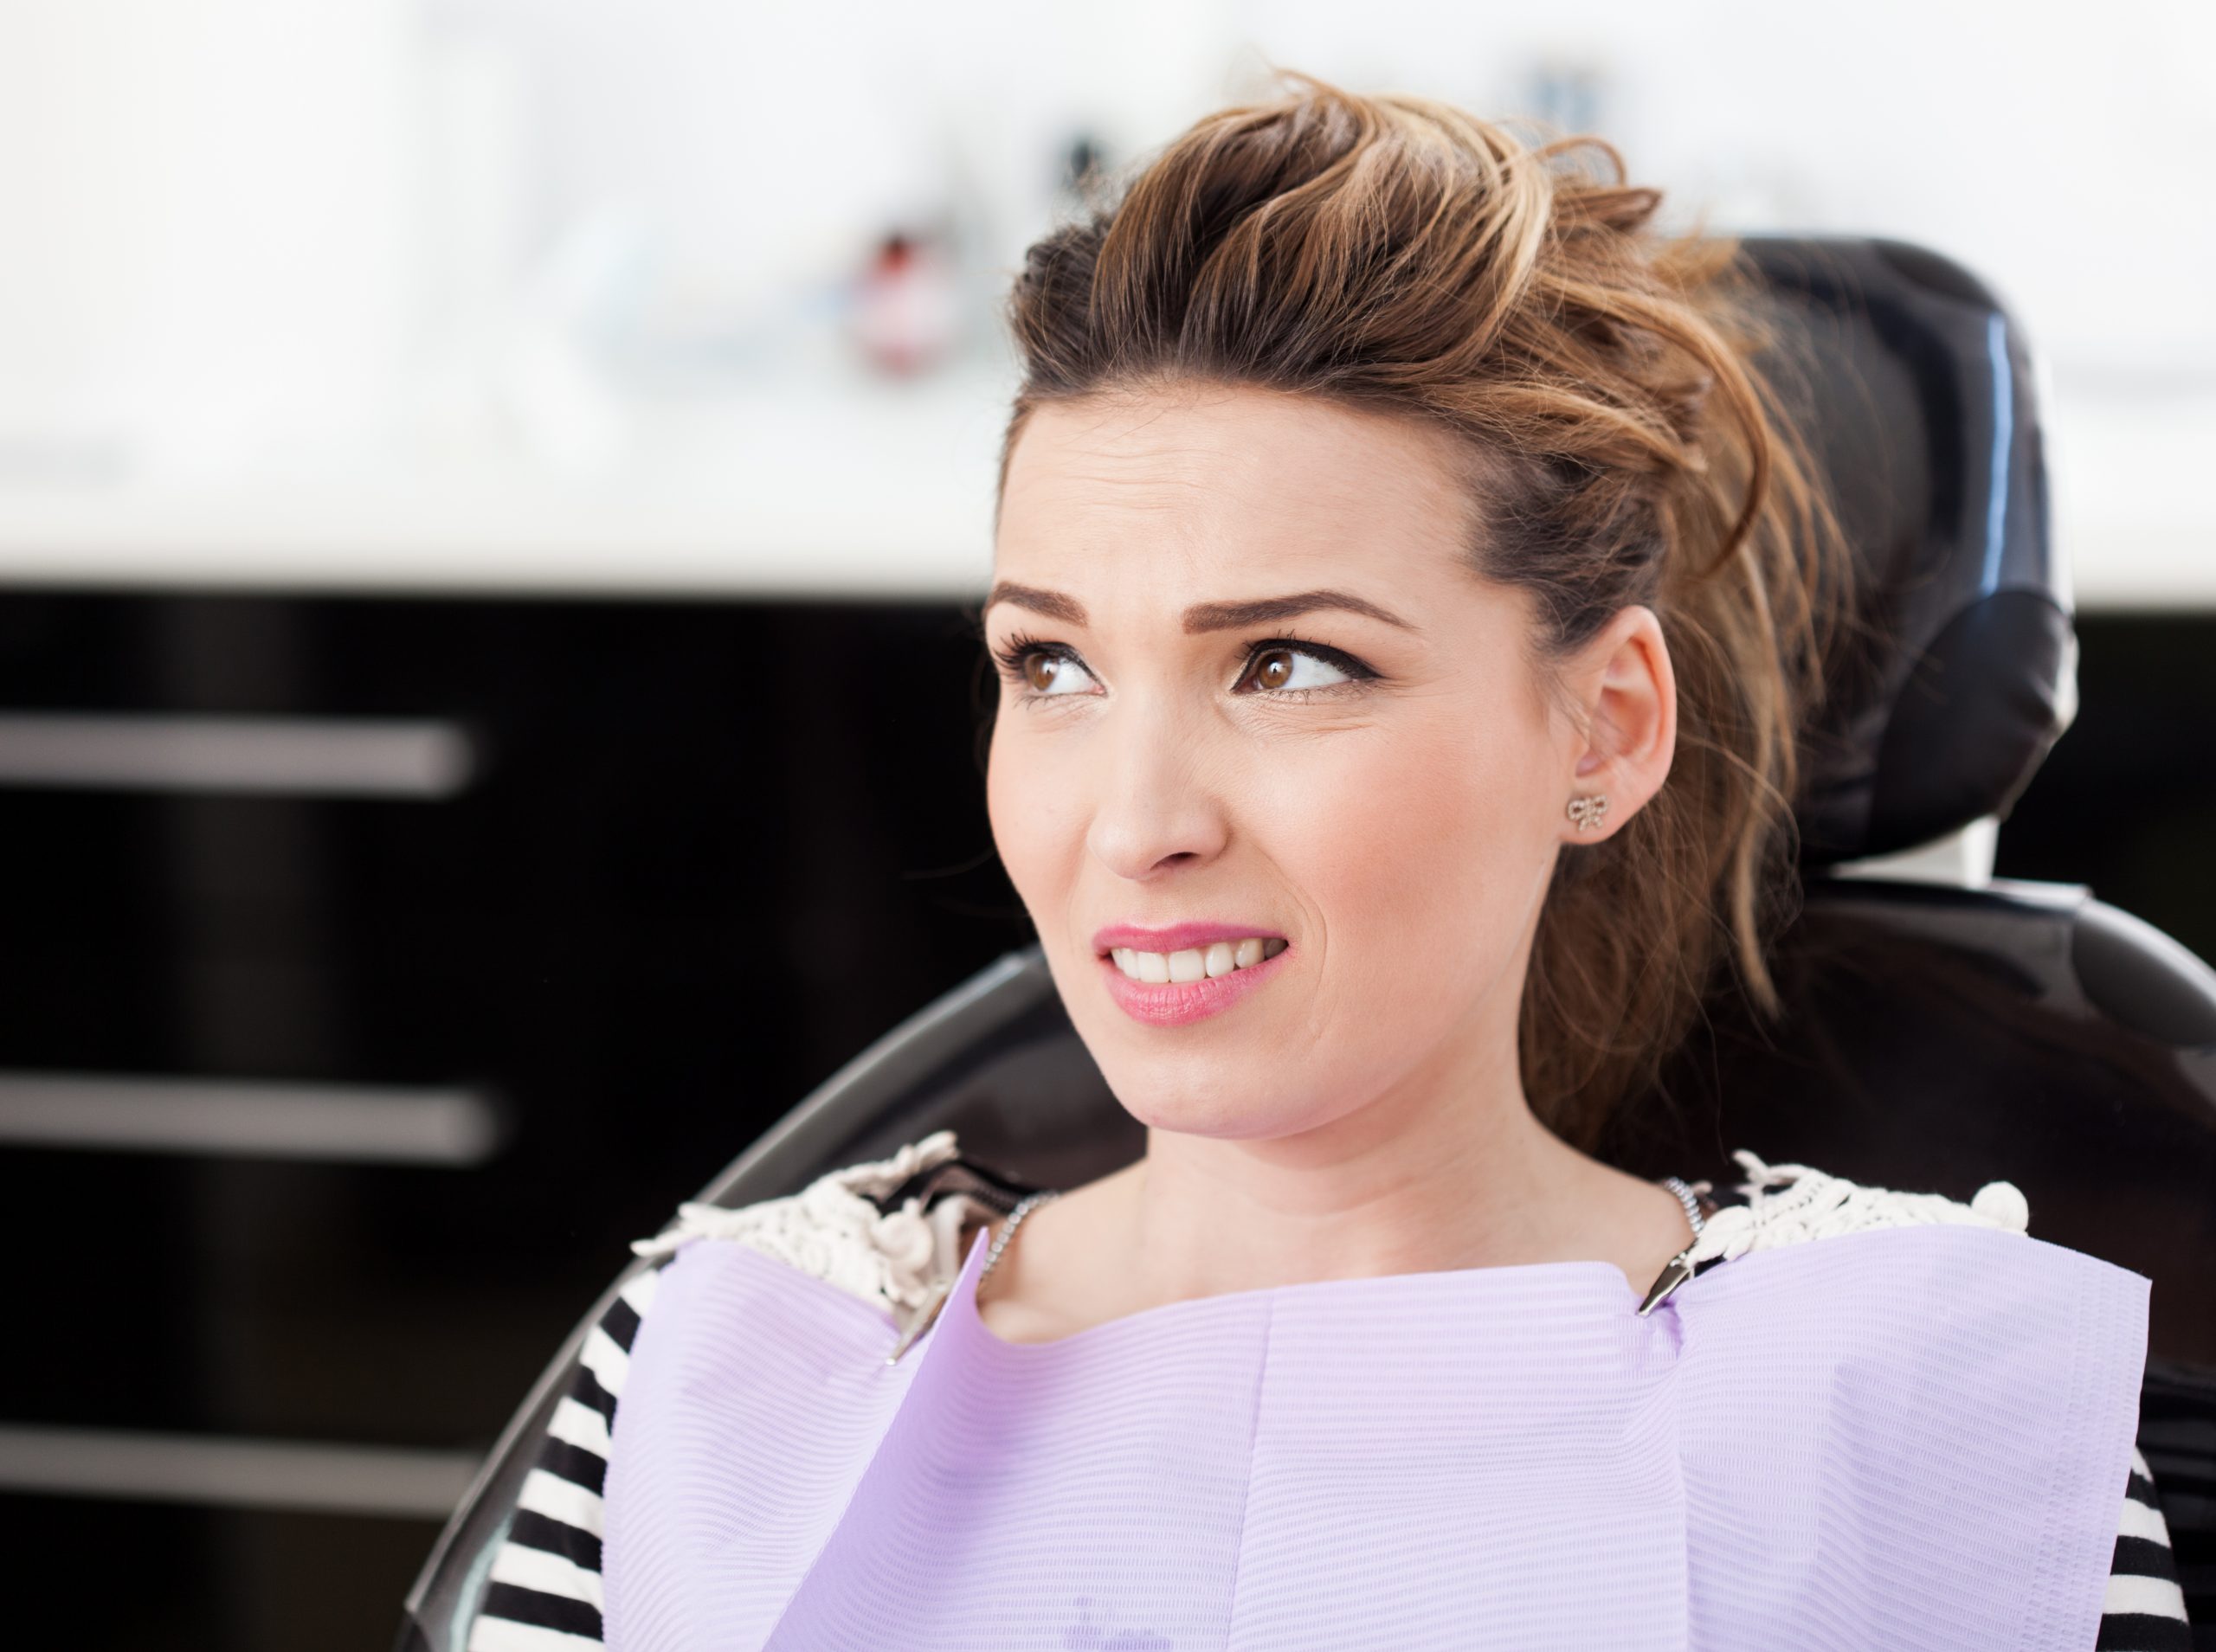 A female patient in a dentist chair looks concerned about dental treatment